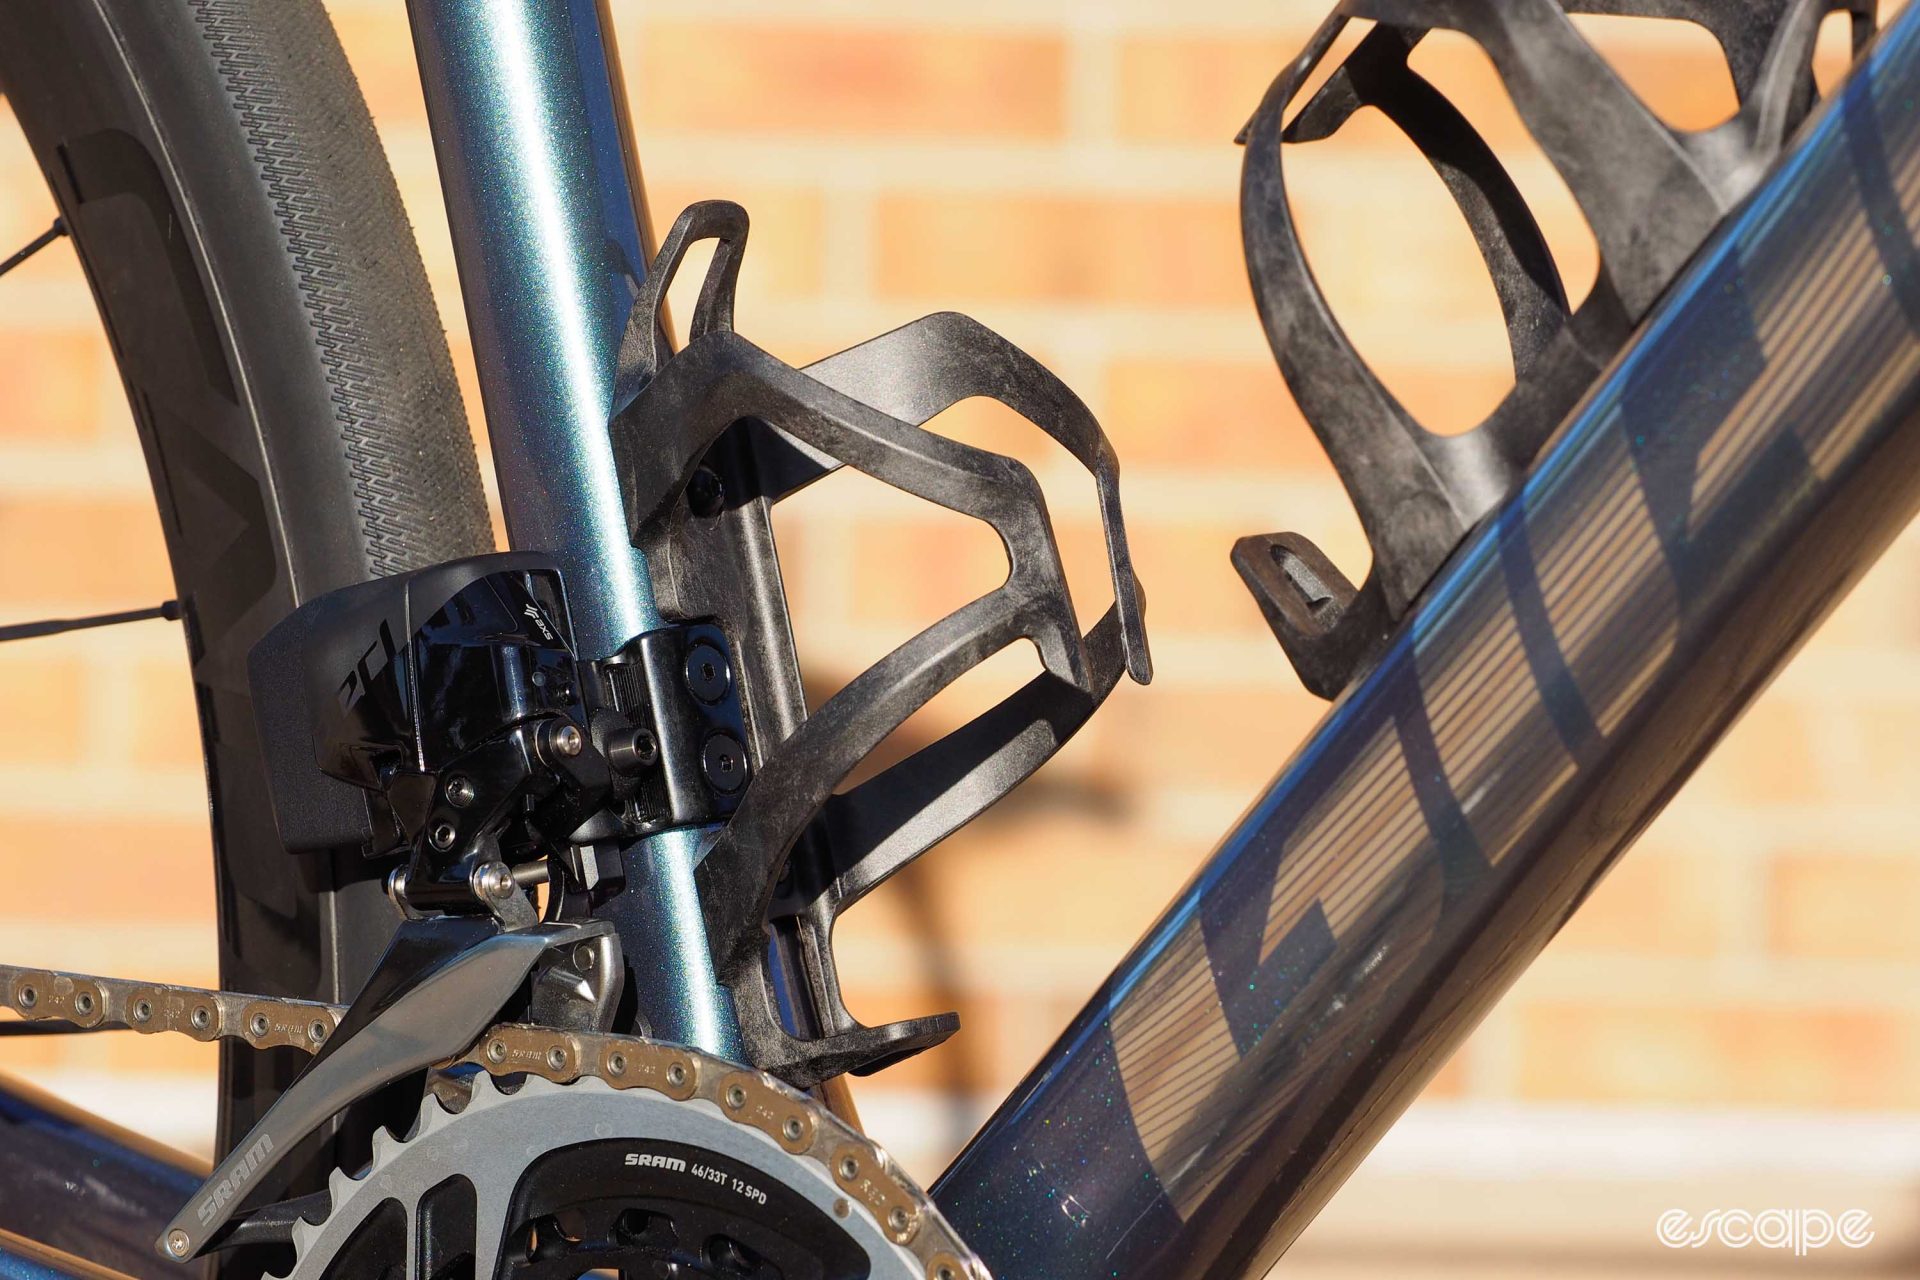 The rear (seat tube) cage even features a cutout for the front derailleur mount.